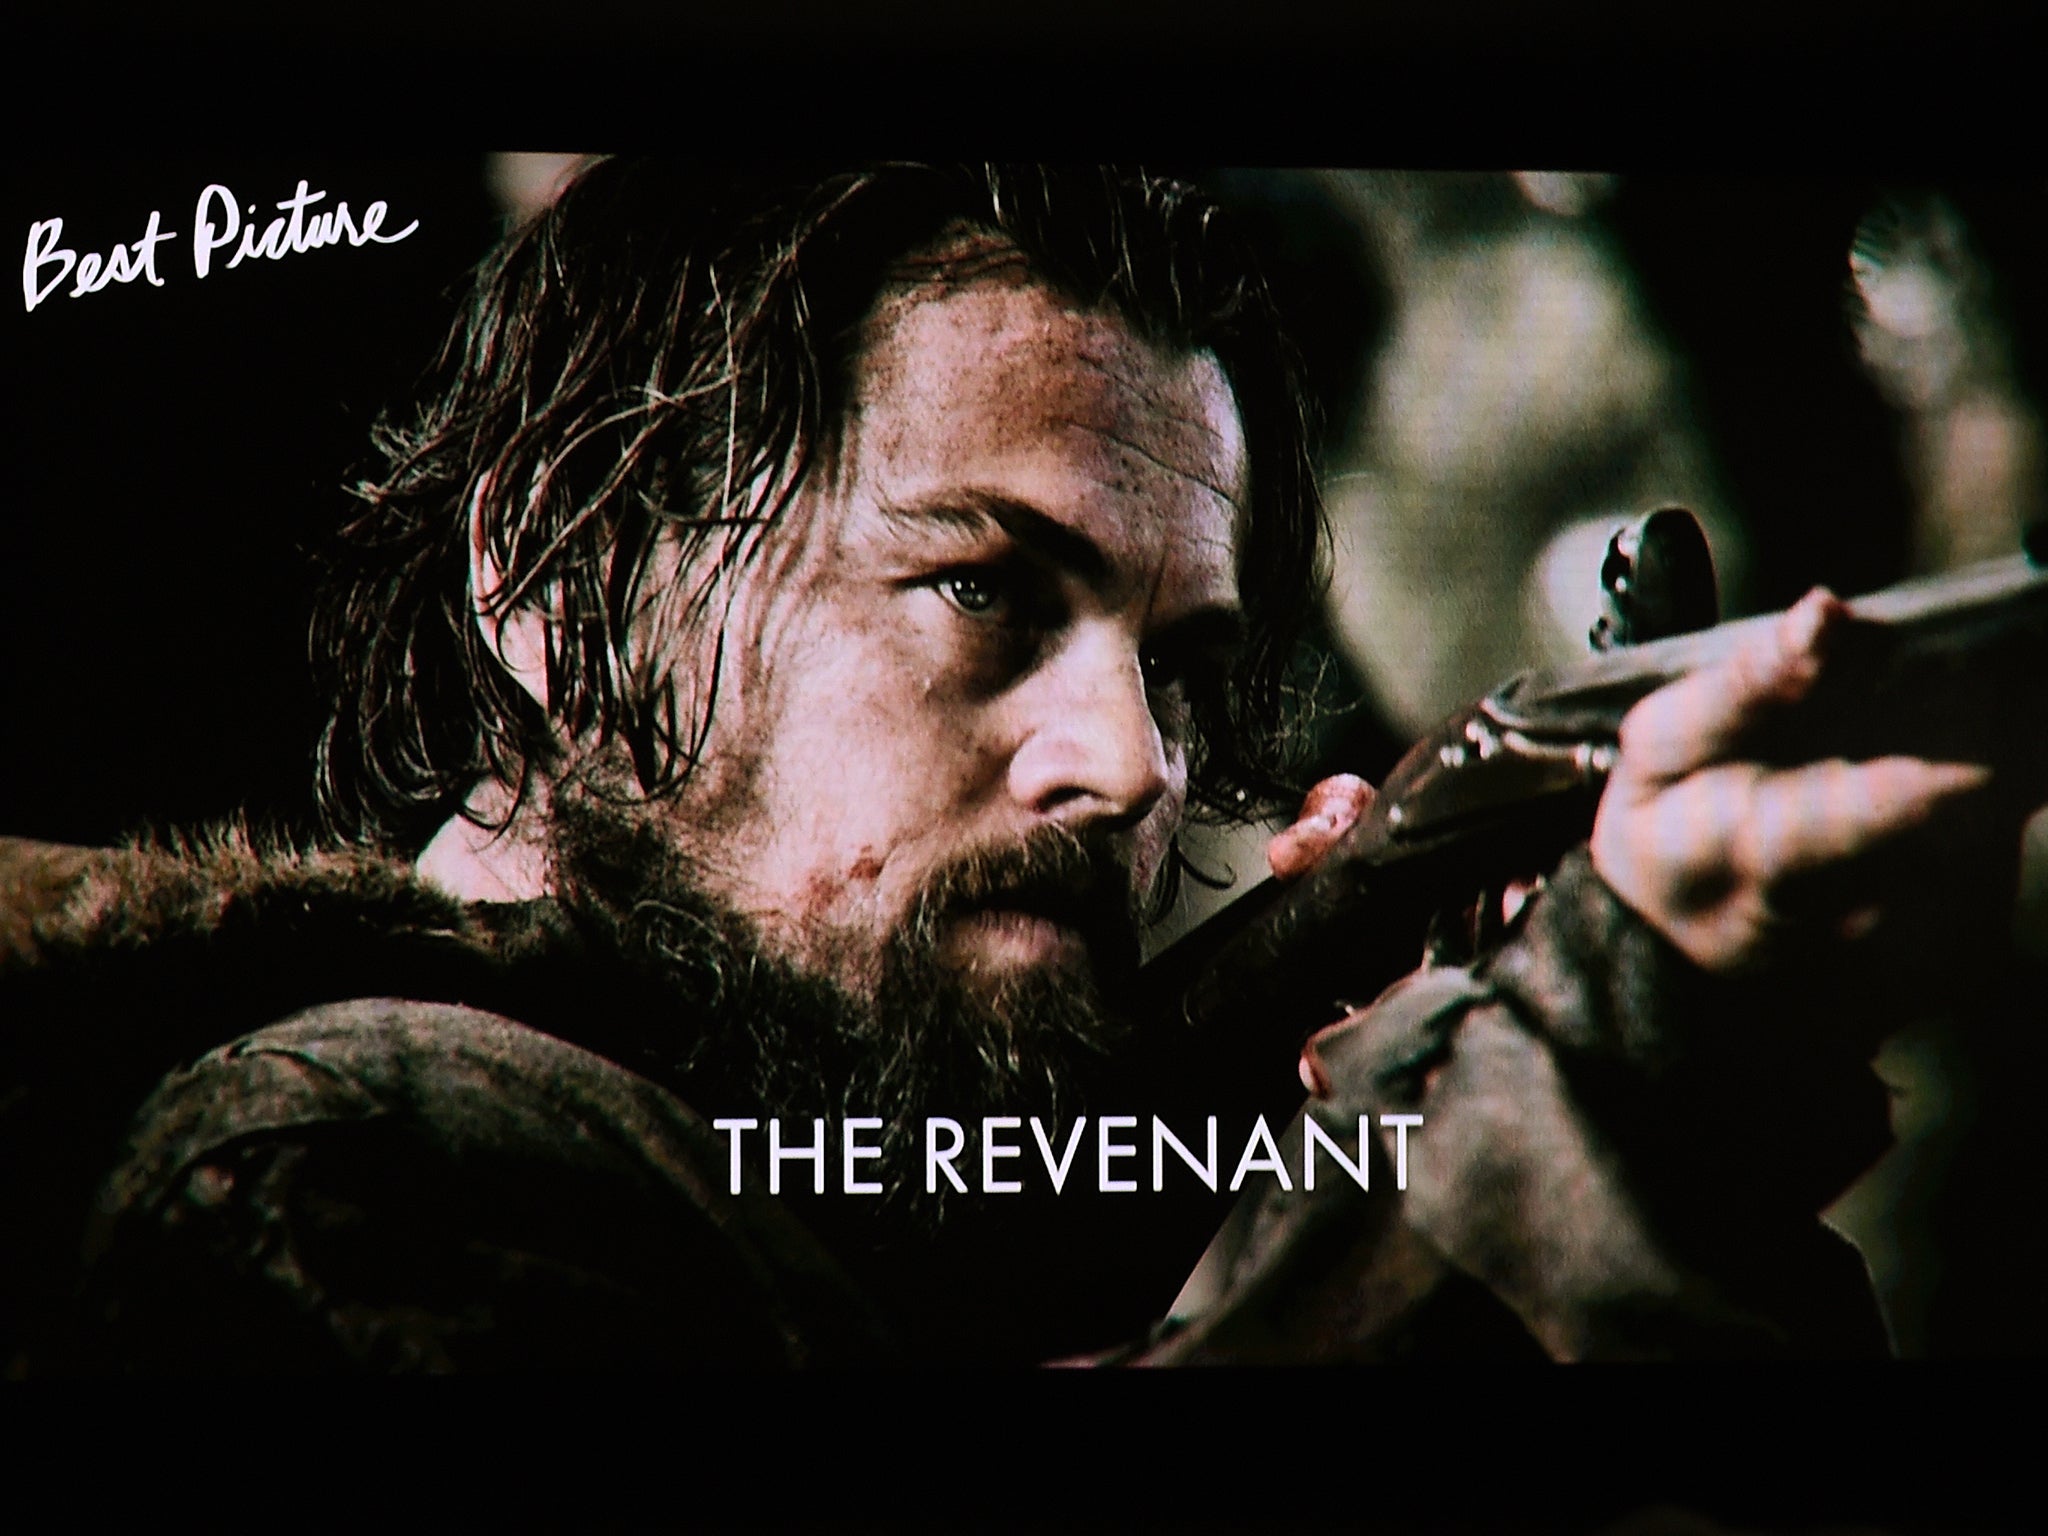 The Revenant was released to UK cinemas today much to the excitement of Manchester United's players